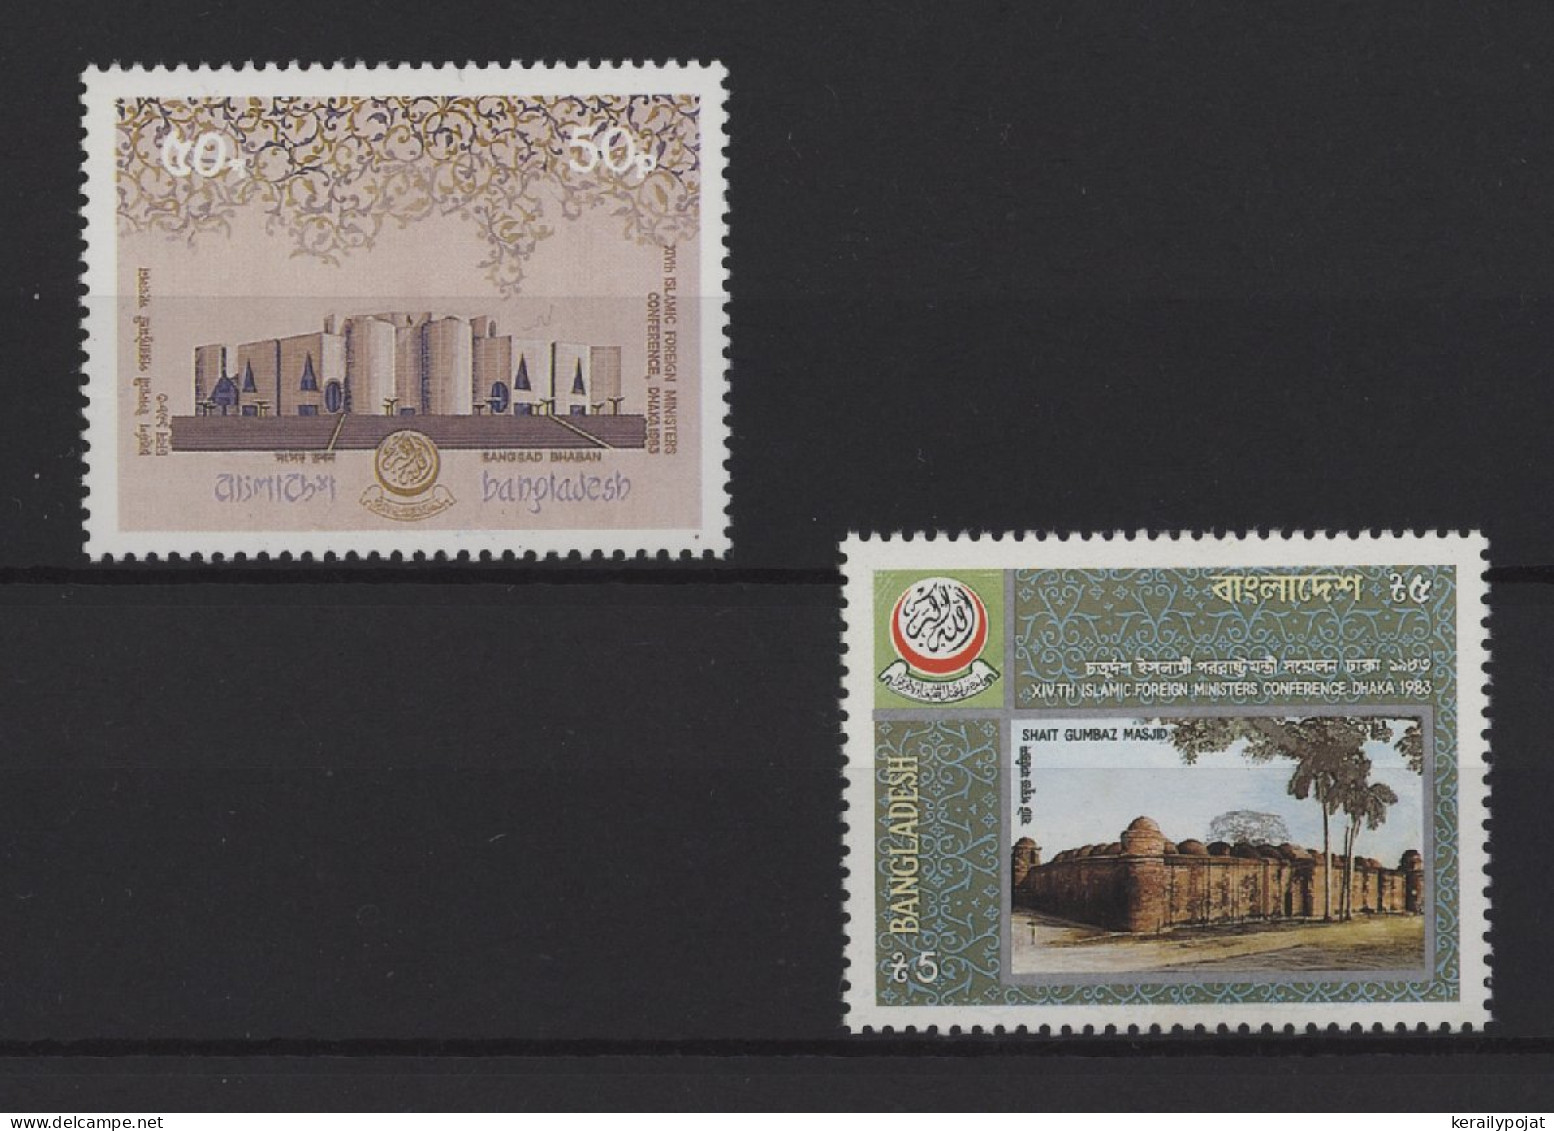 Bangladesh - 1983 Conference Of Foreign Ministers Of The Islamic States MNH__(TH-25504) - Bangladesh